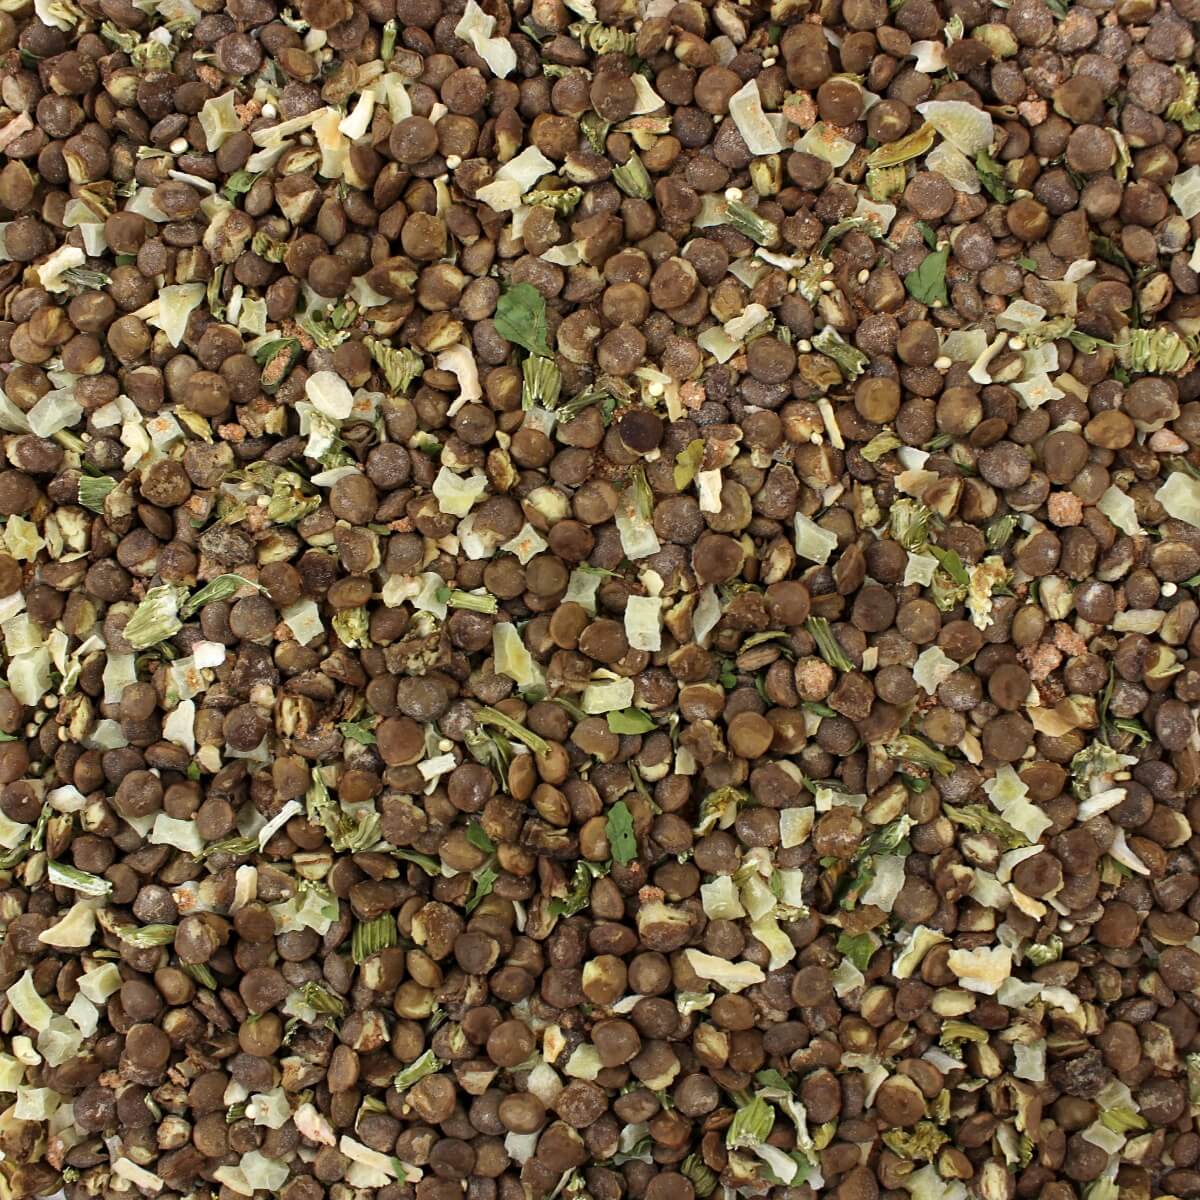 A close up image of a pile of brown seeds sold by Harmony House.